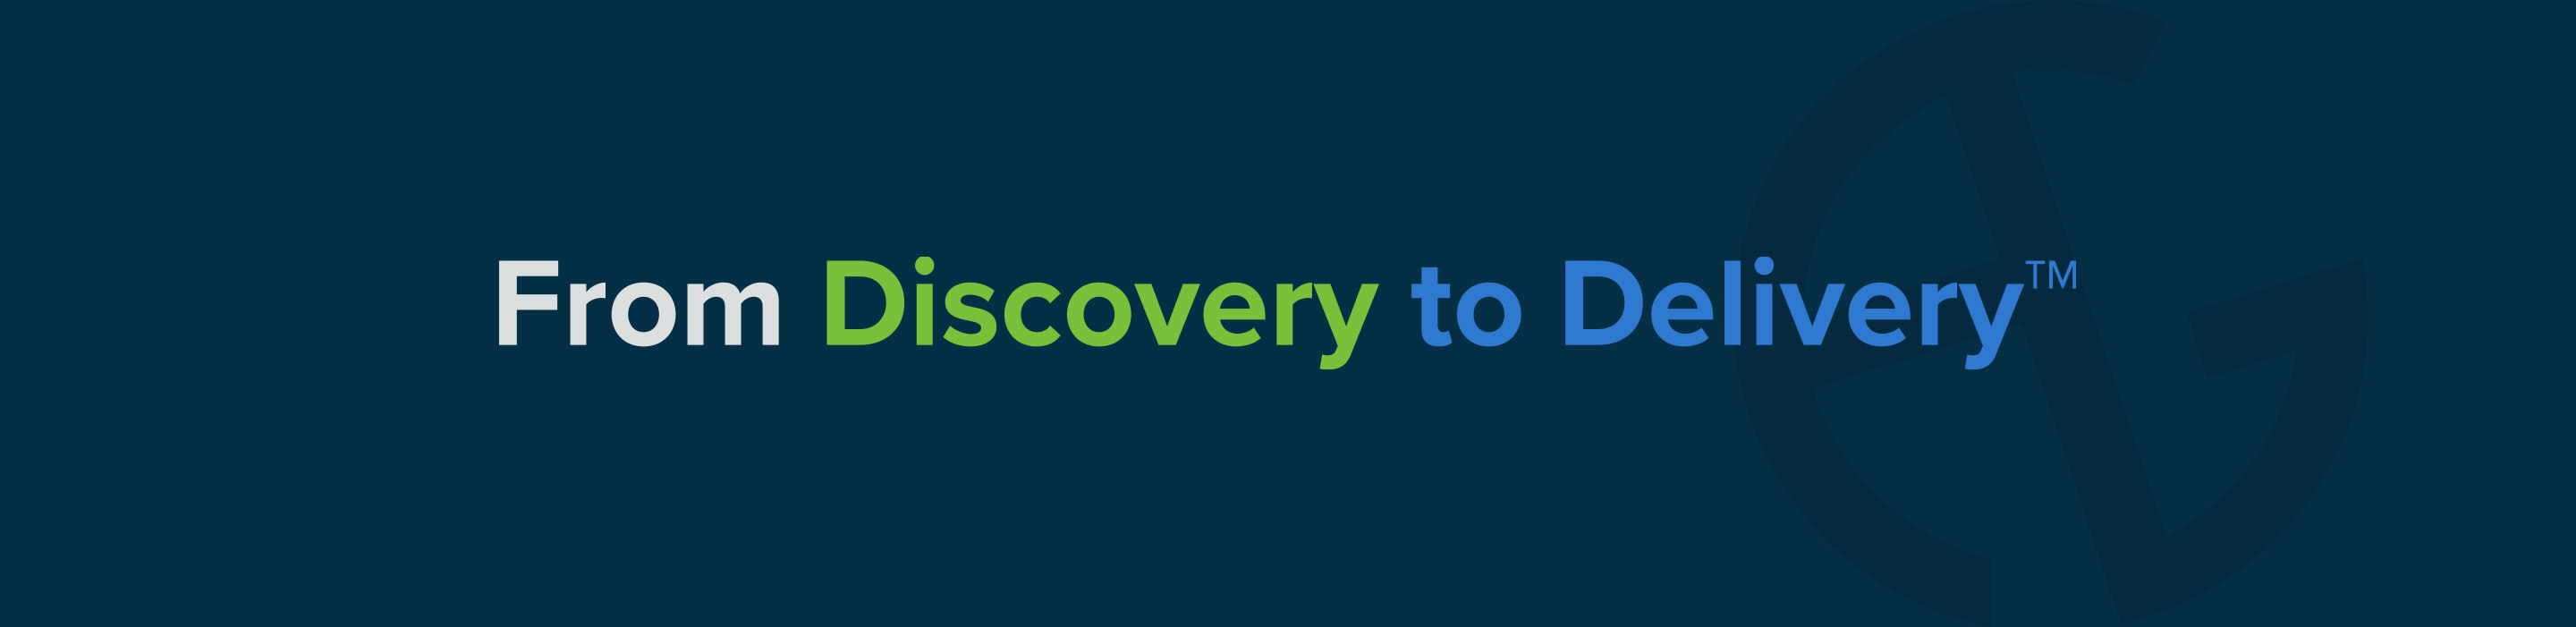 From Discovery To Delivery